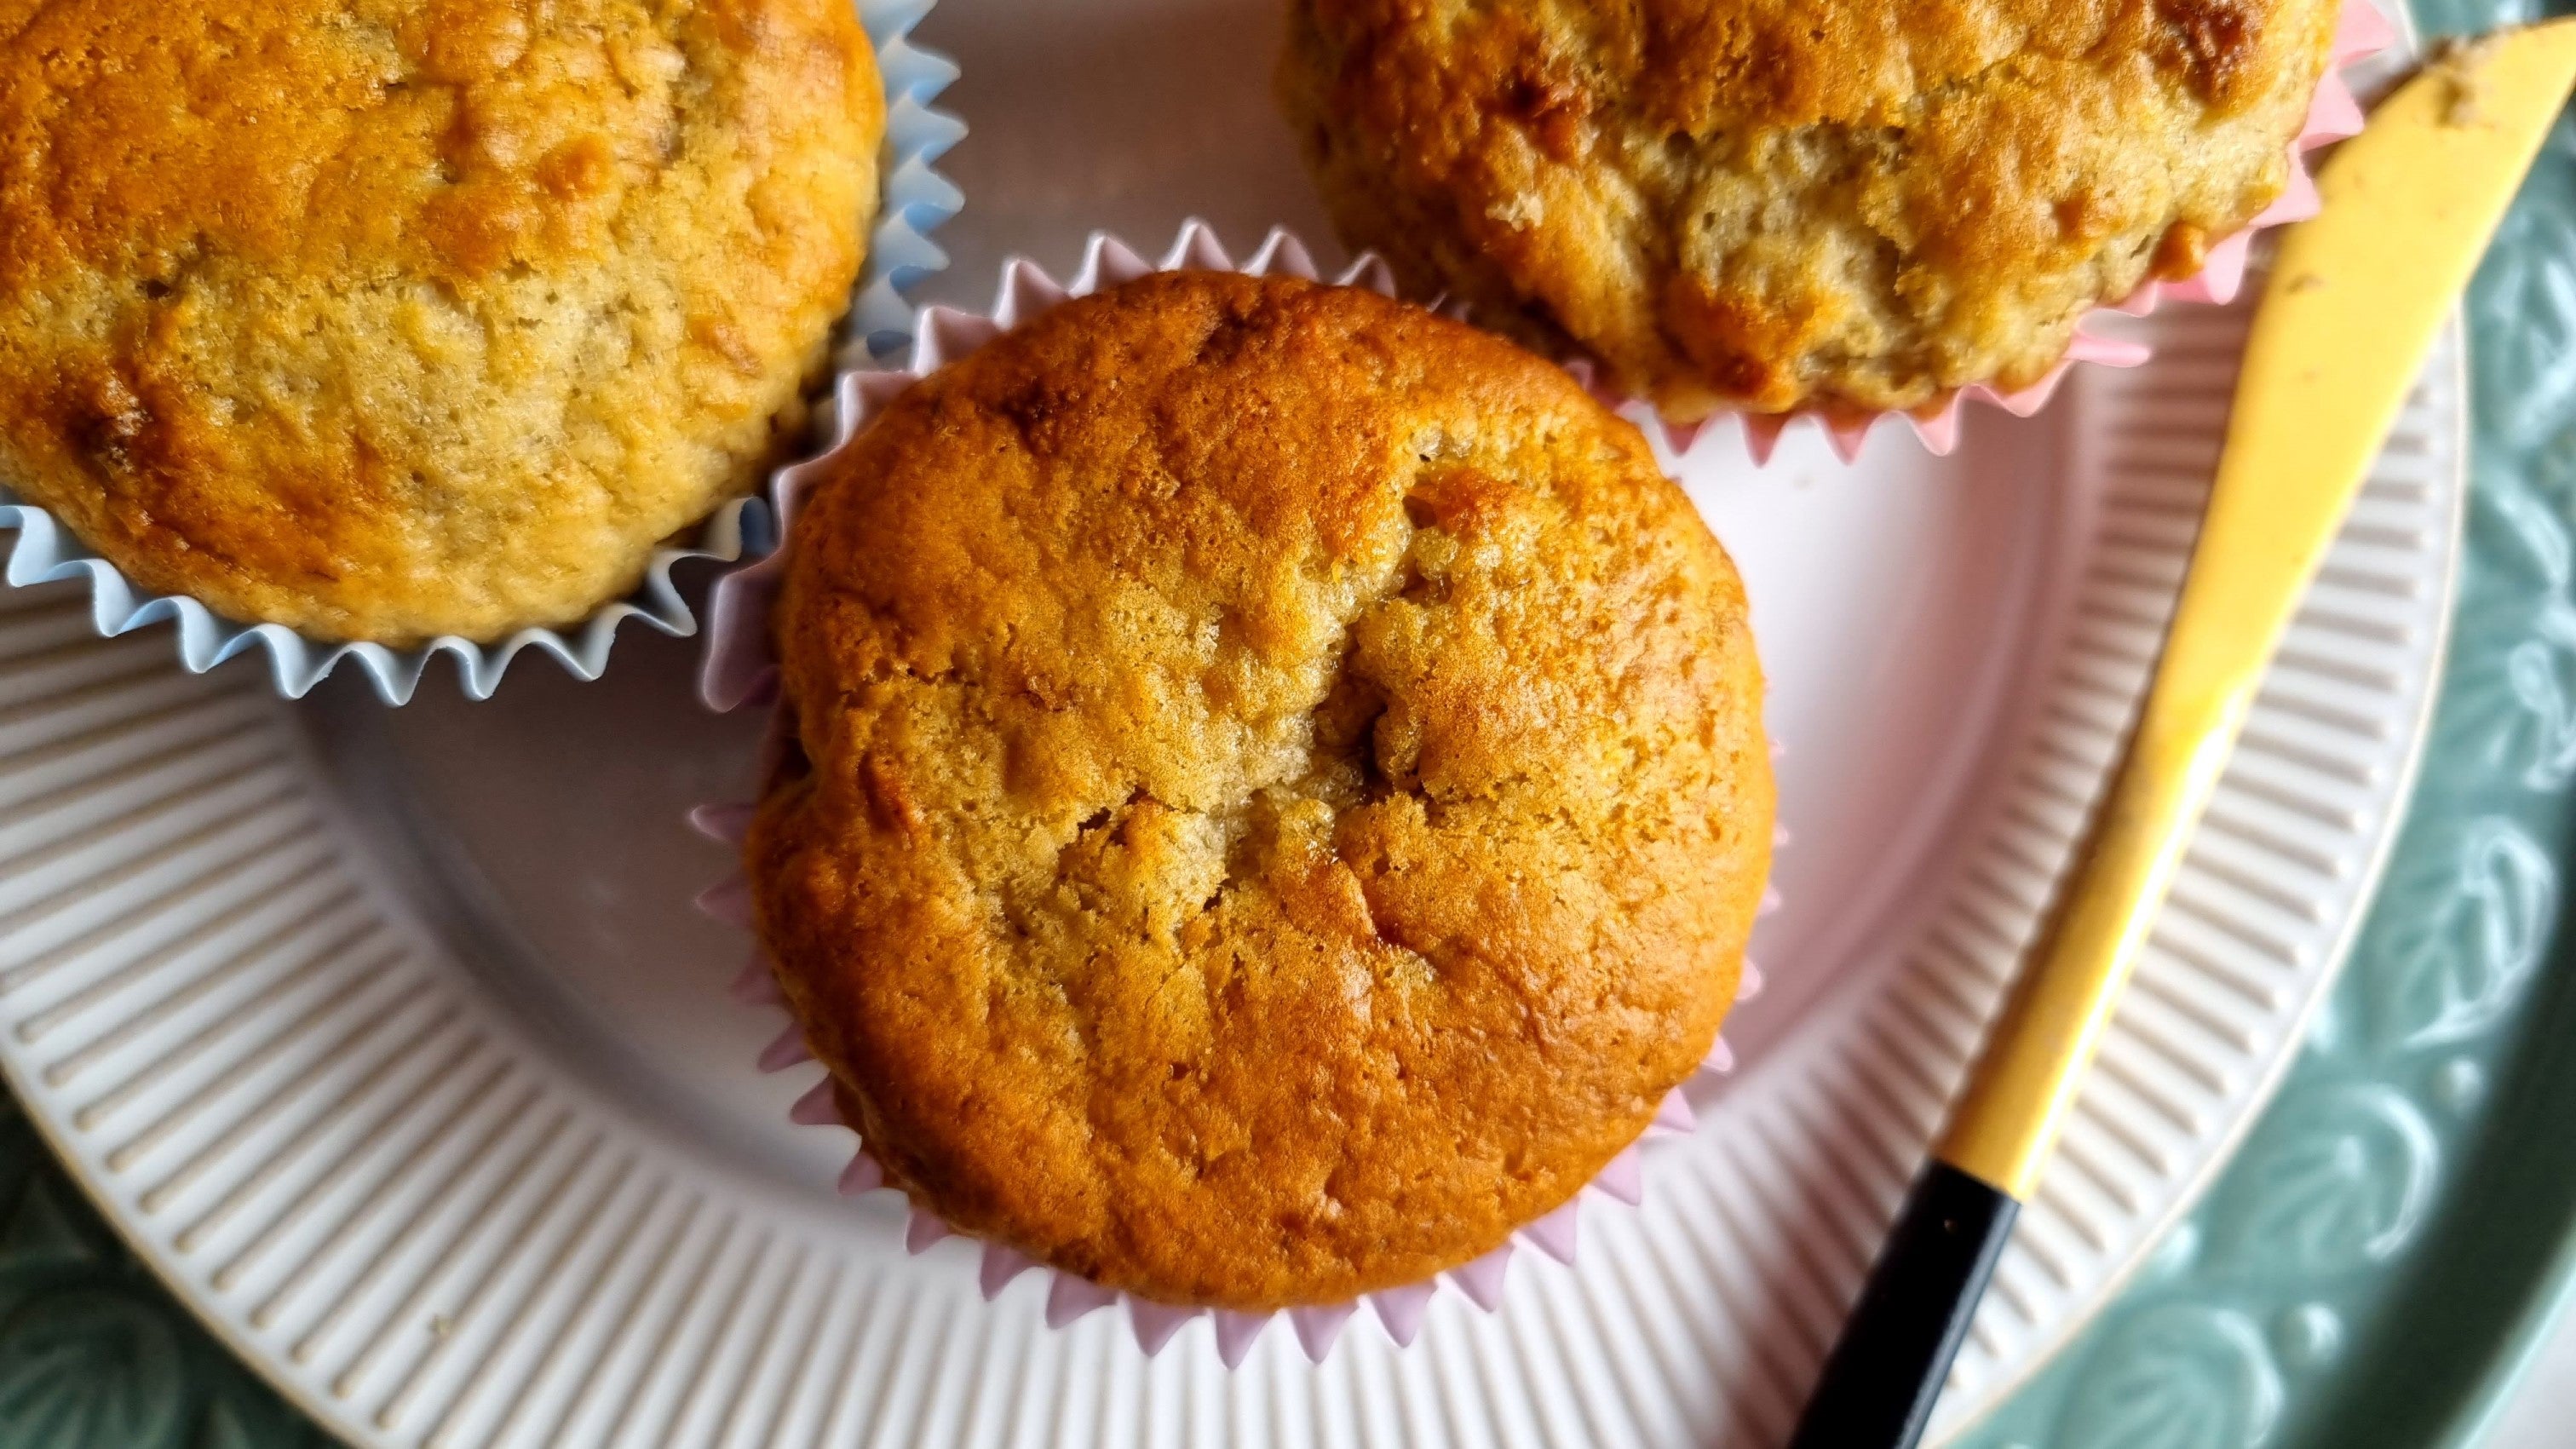 Top-down view of fresh banana muffins with golden tops